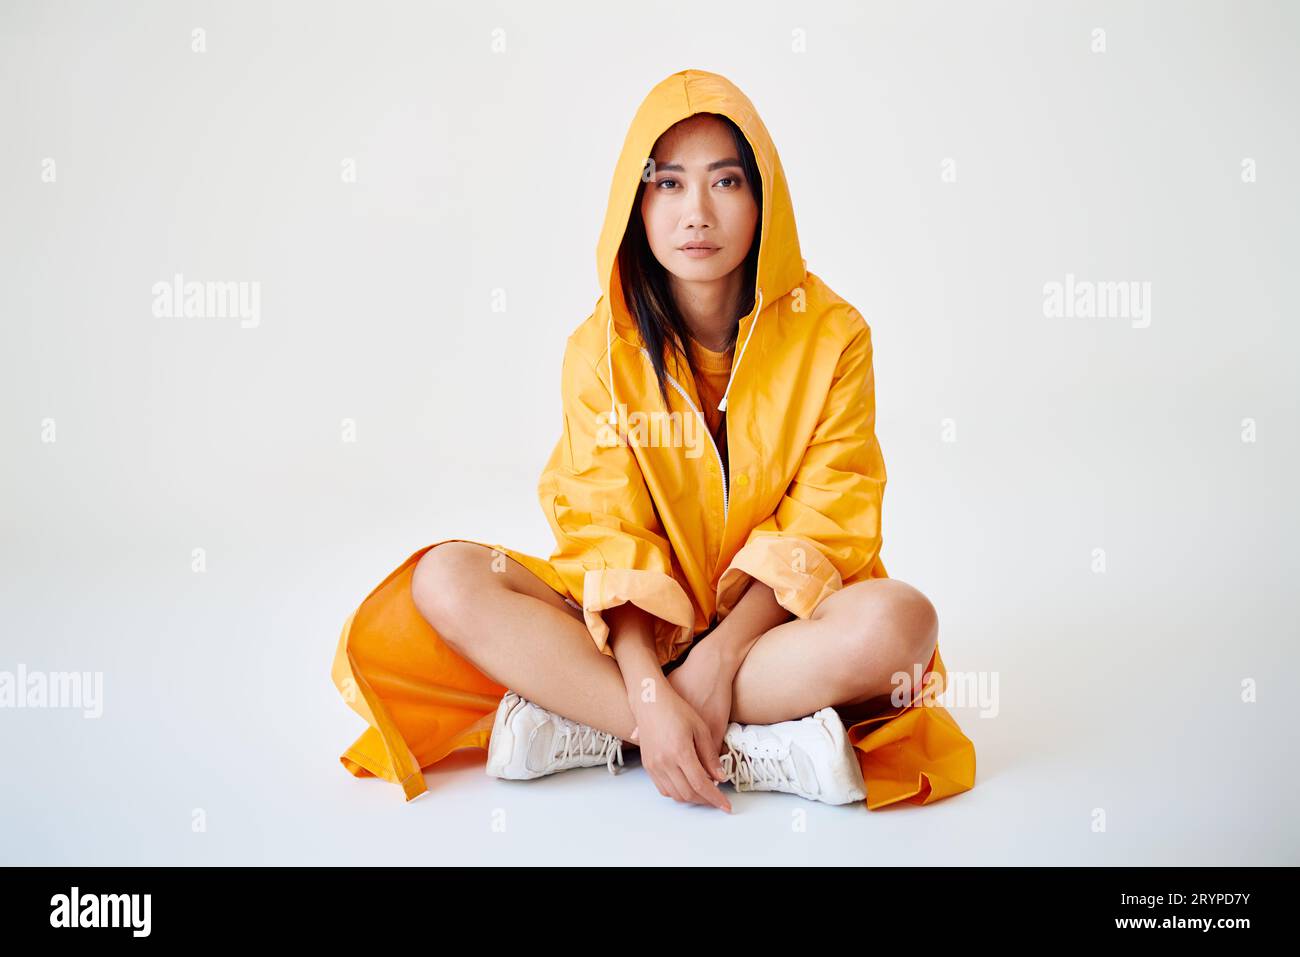 Smiling asian girl with braces dressed in bright yellow raincoat posing with hood on her head on white studio background sitting on floor with copy sp Stock Photo